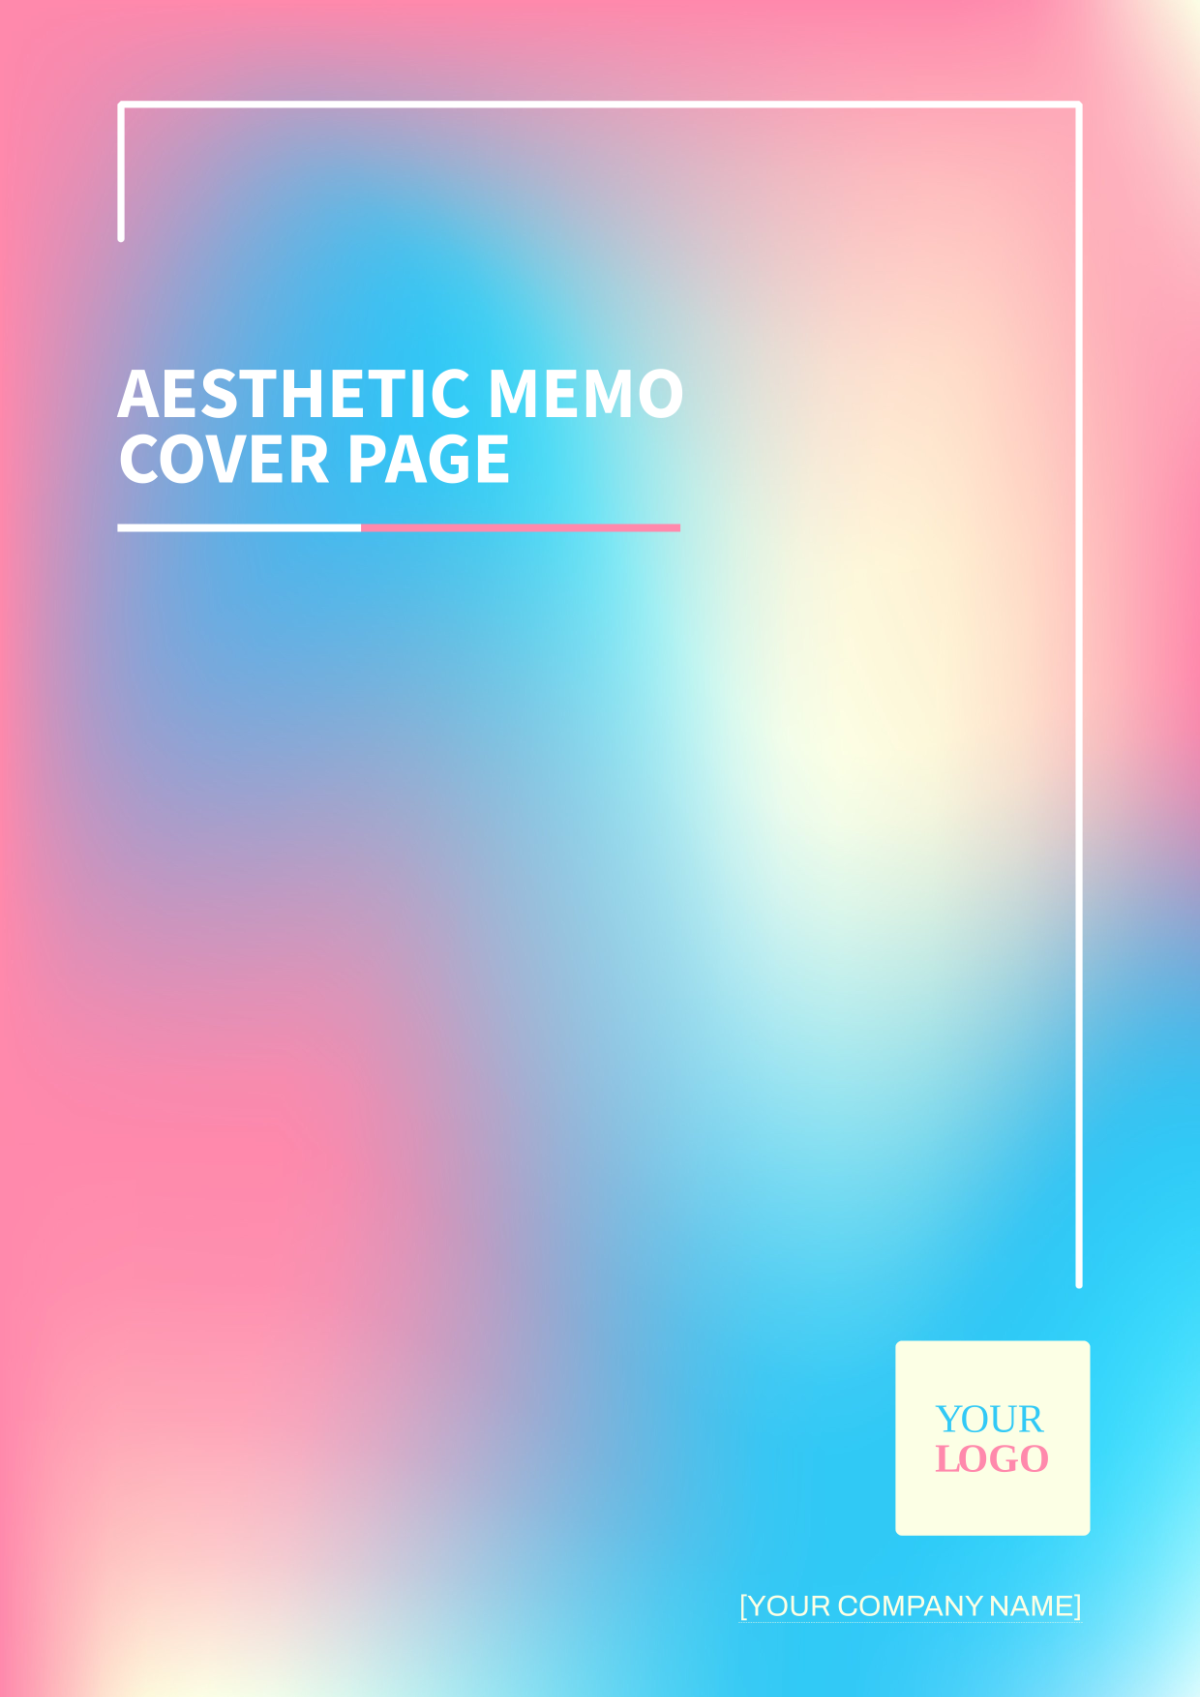 Aesthetic Memo Cover Page